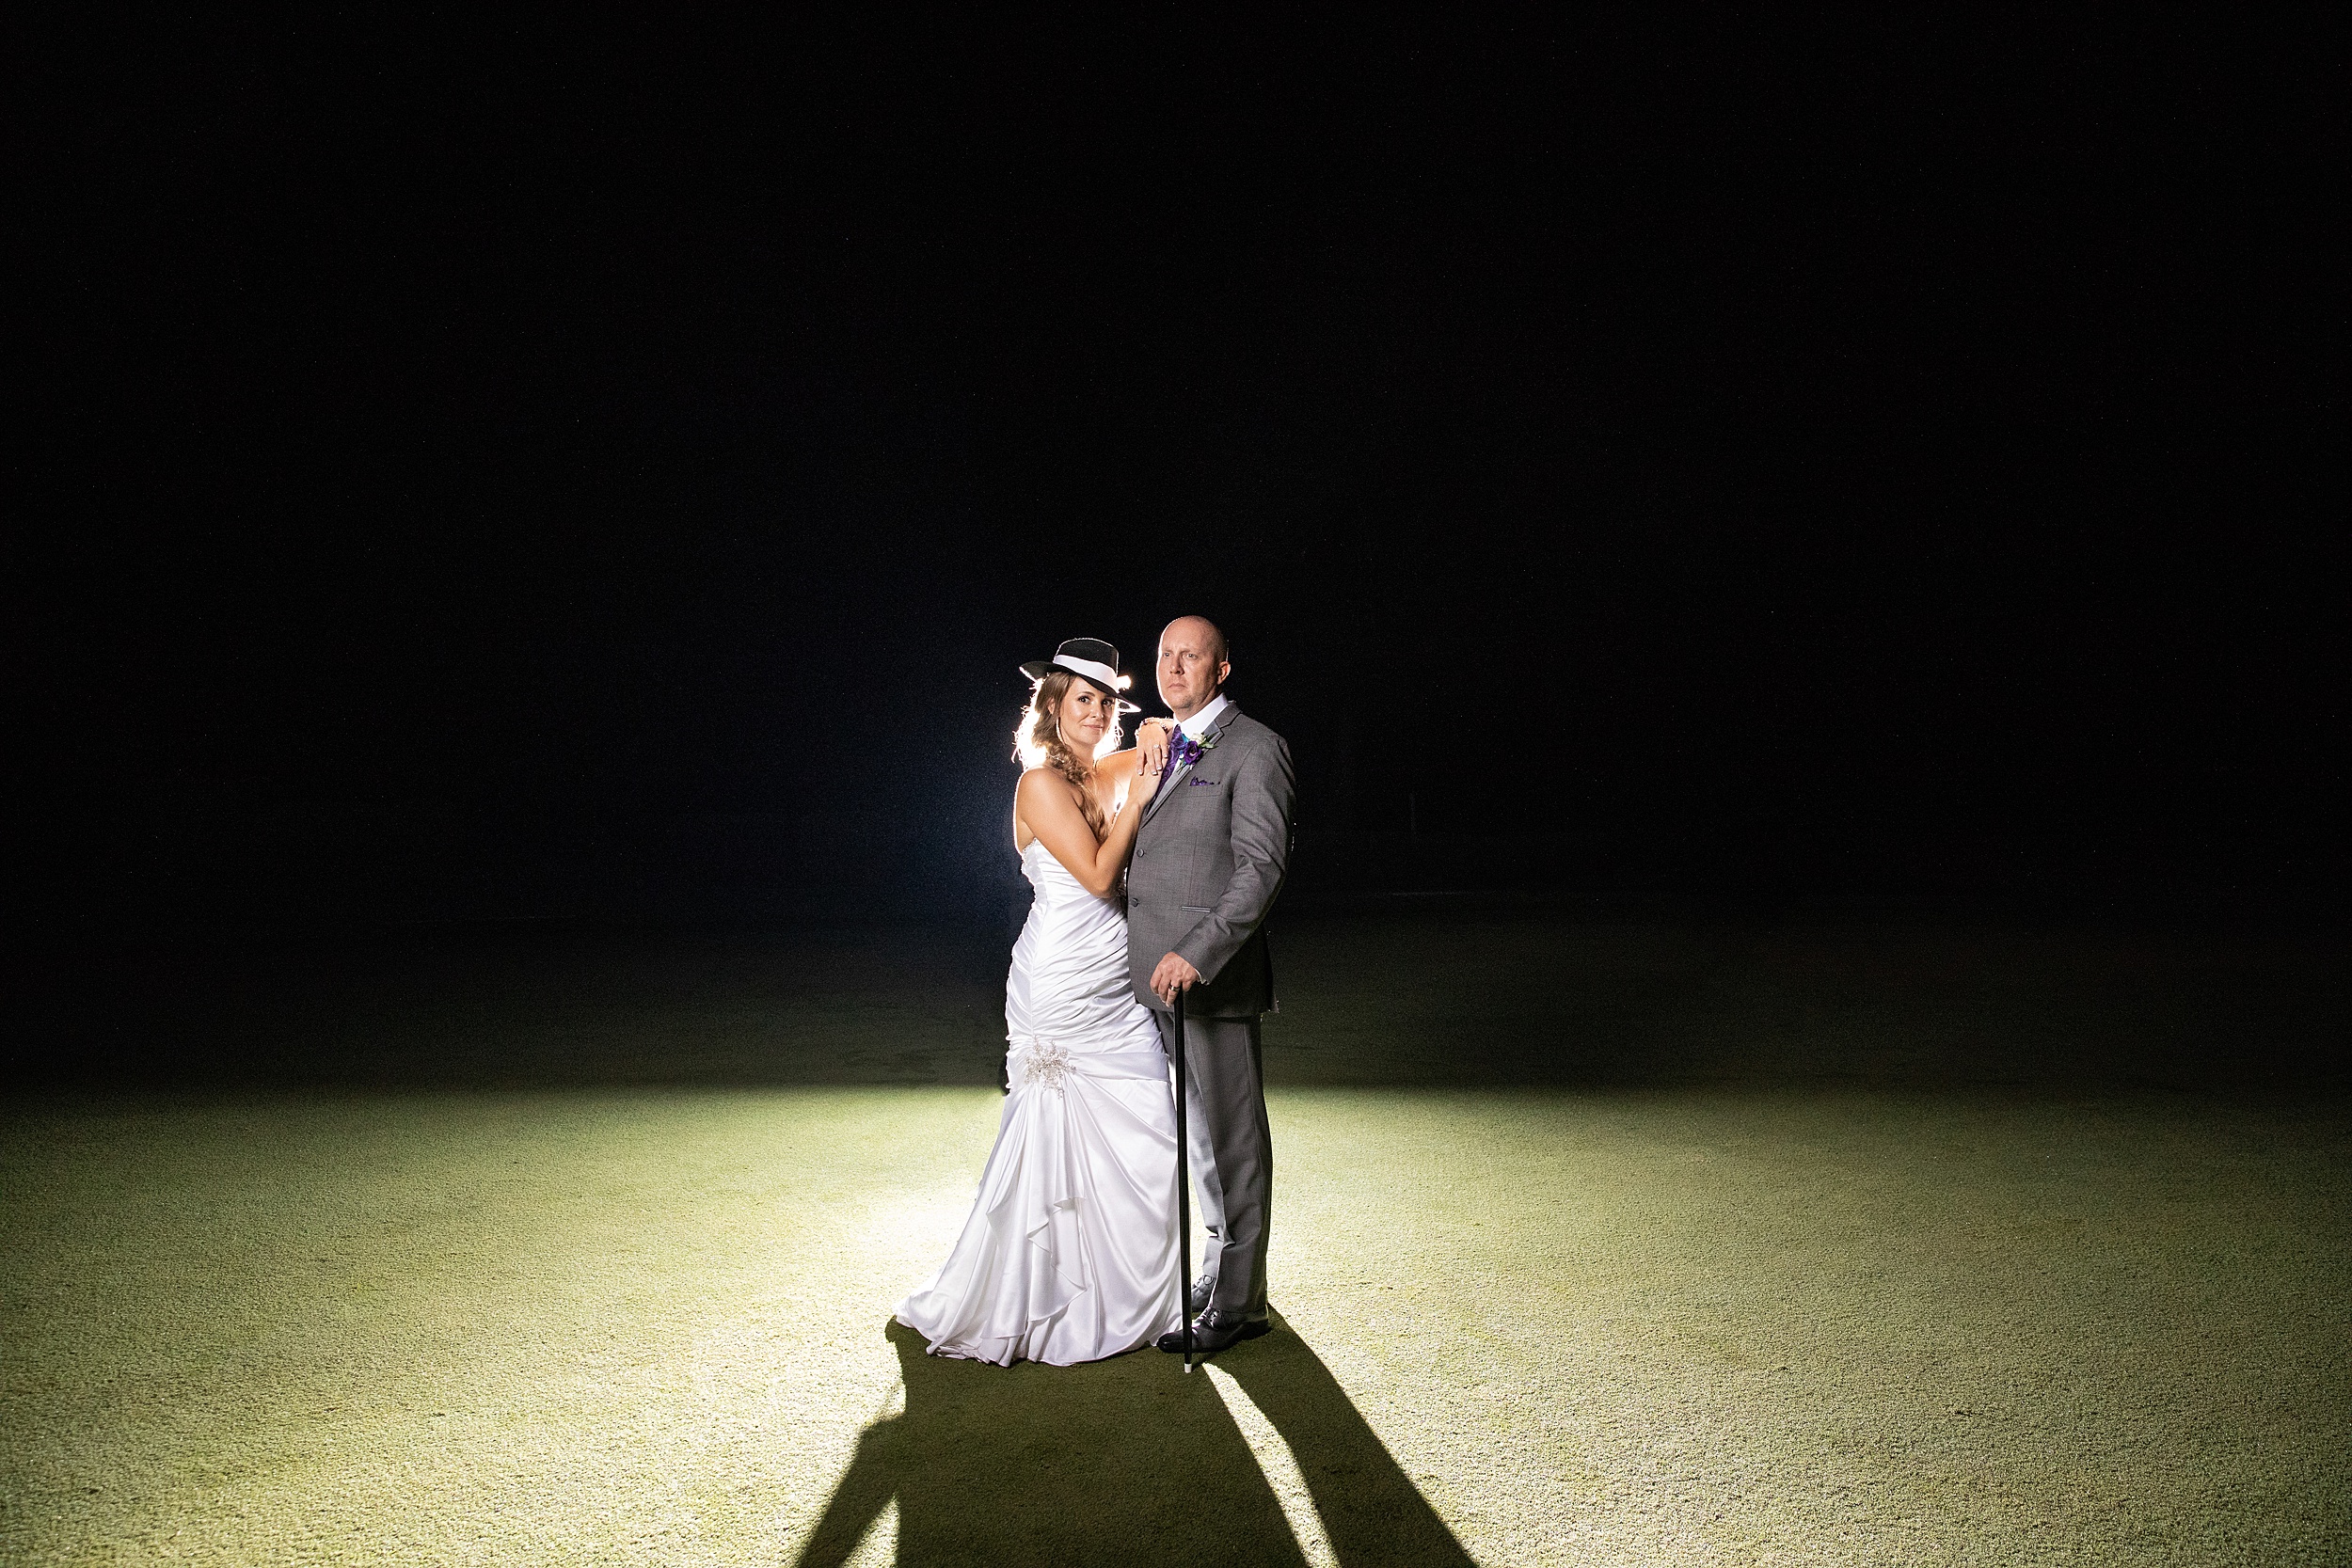 Newlyweds stand on a manicured lawn at night holding a cane and the bride wearing a hat